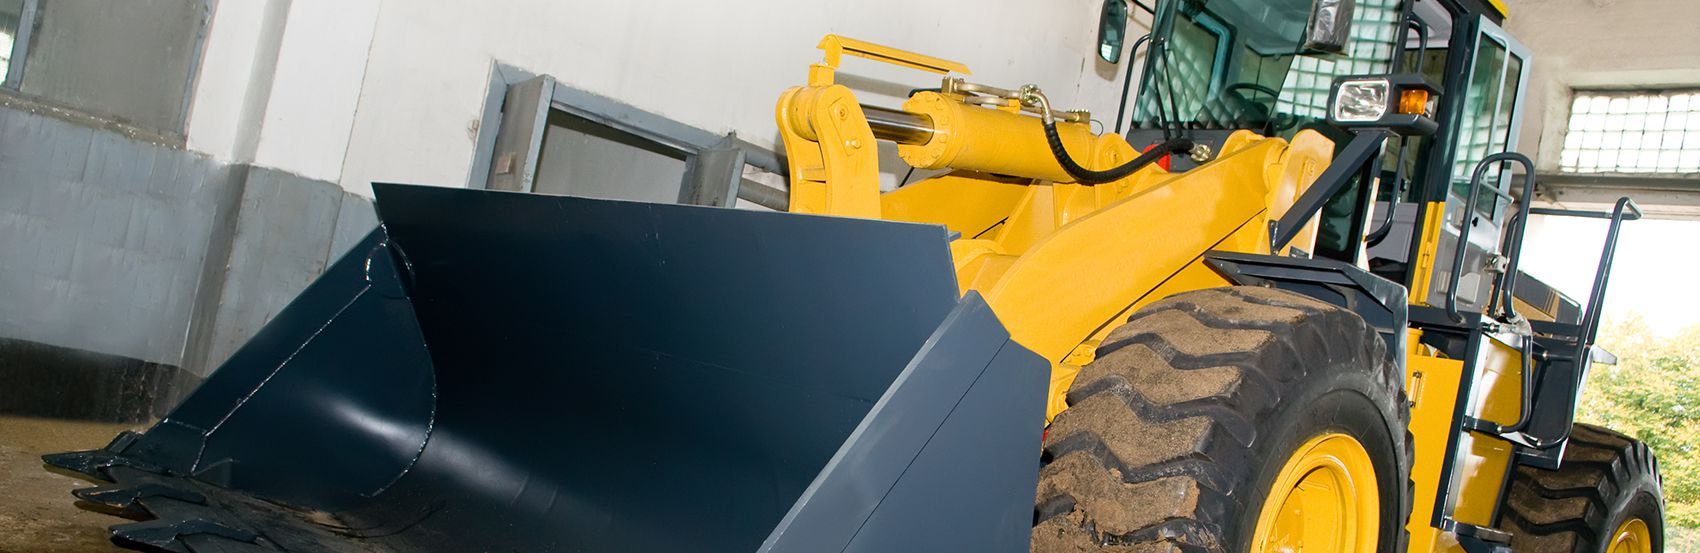 Agricultural Equipment - Machinery Service & Repairs In Aitkenvale